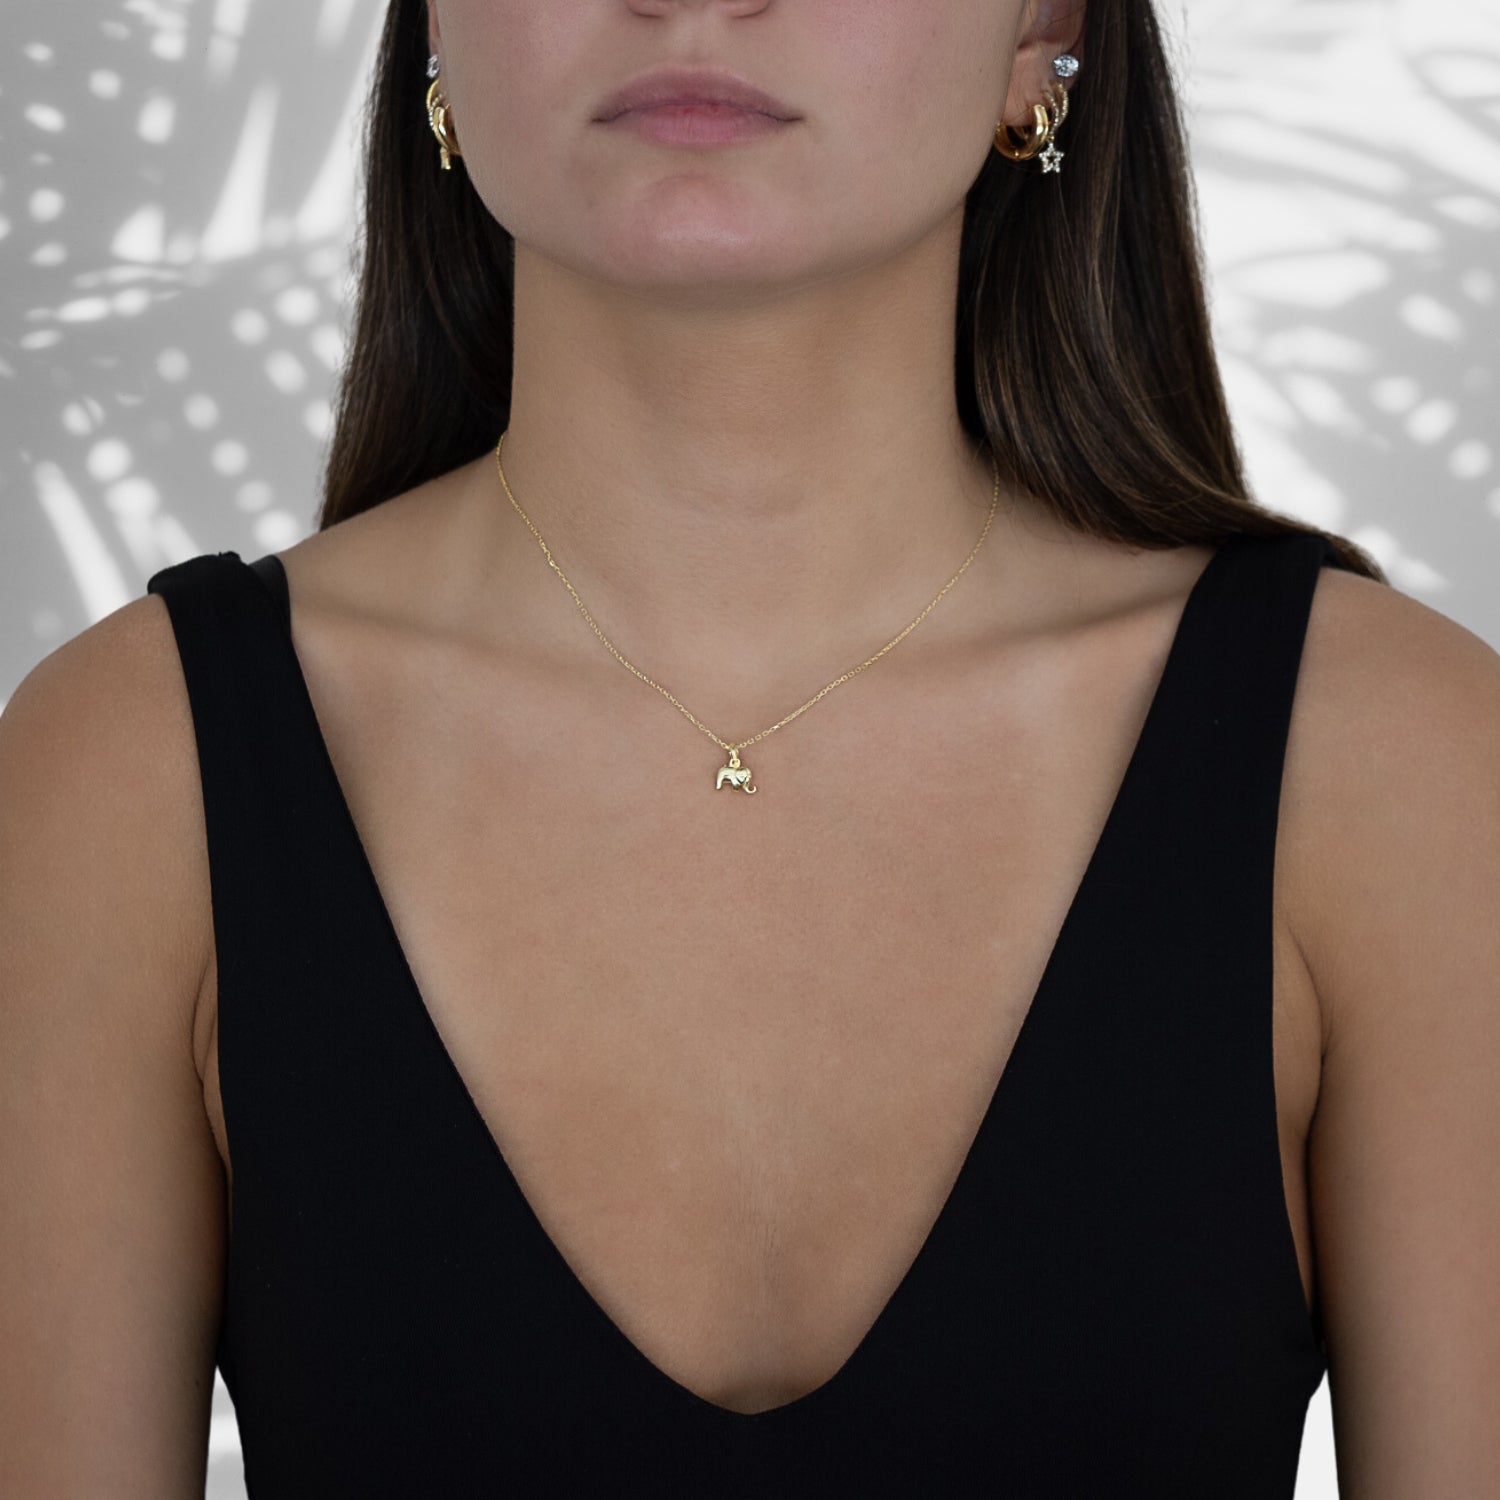 The Dainty Gold Elephant Necklace adding a touch of charm and sophistication to the model's outfit, capturing attention with its symbolic elephant pendant.